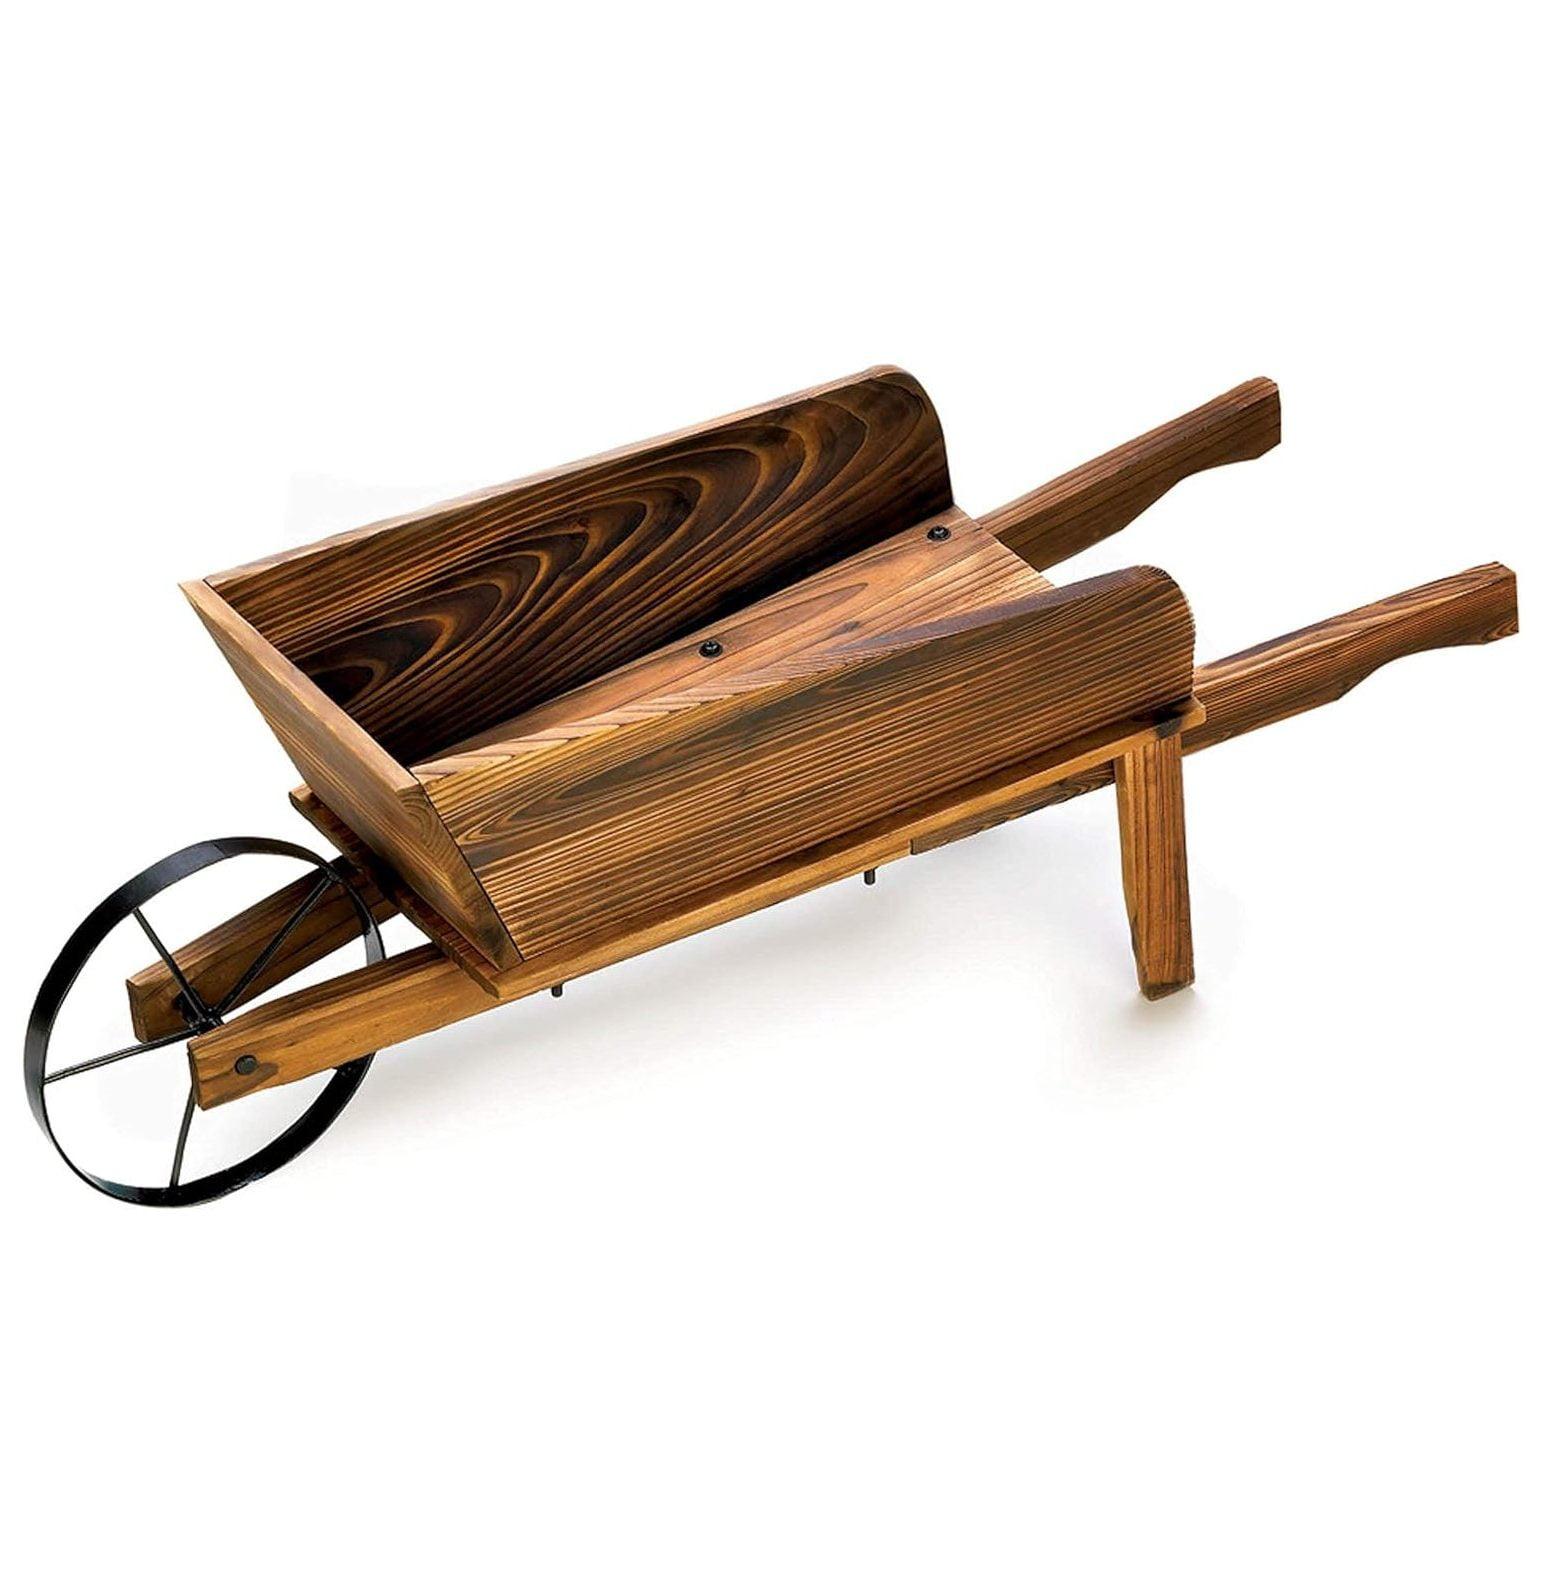 Charming Country-Style Wagon Planter for Indoor/Outdoor Decor